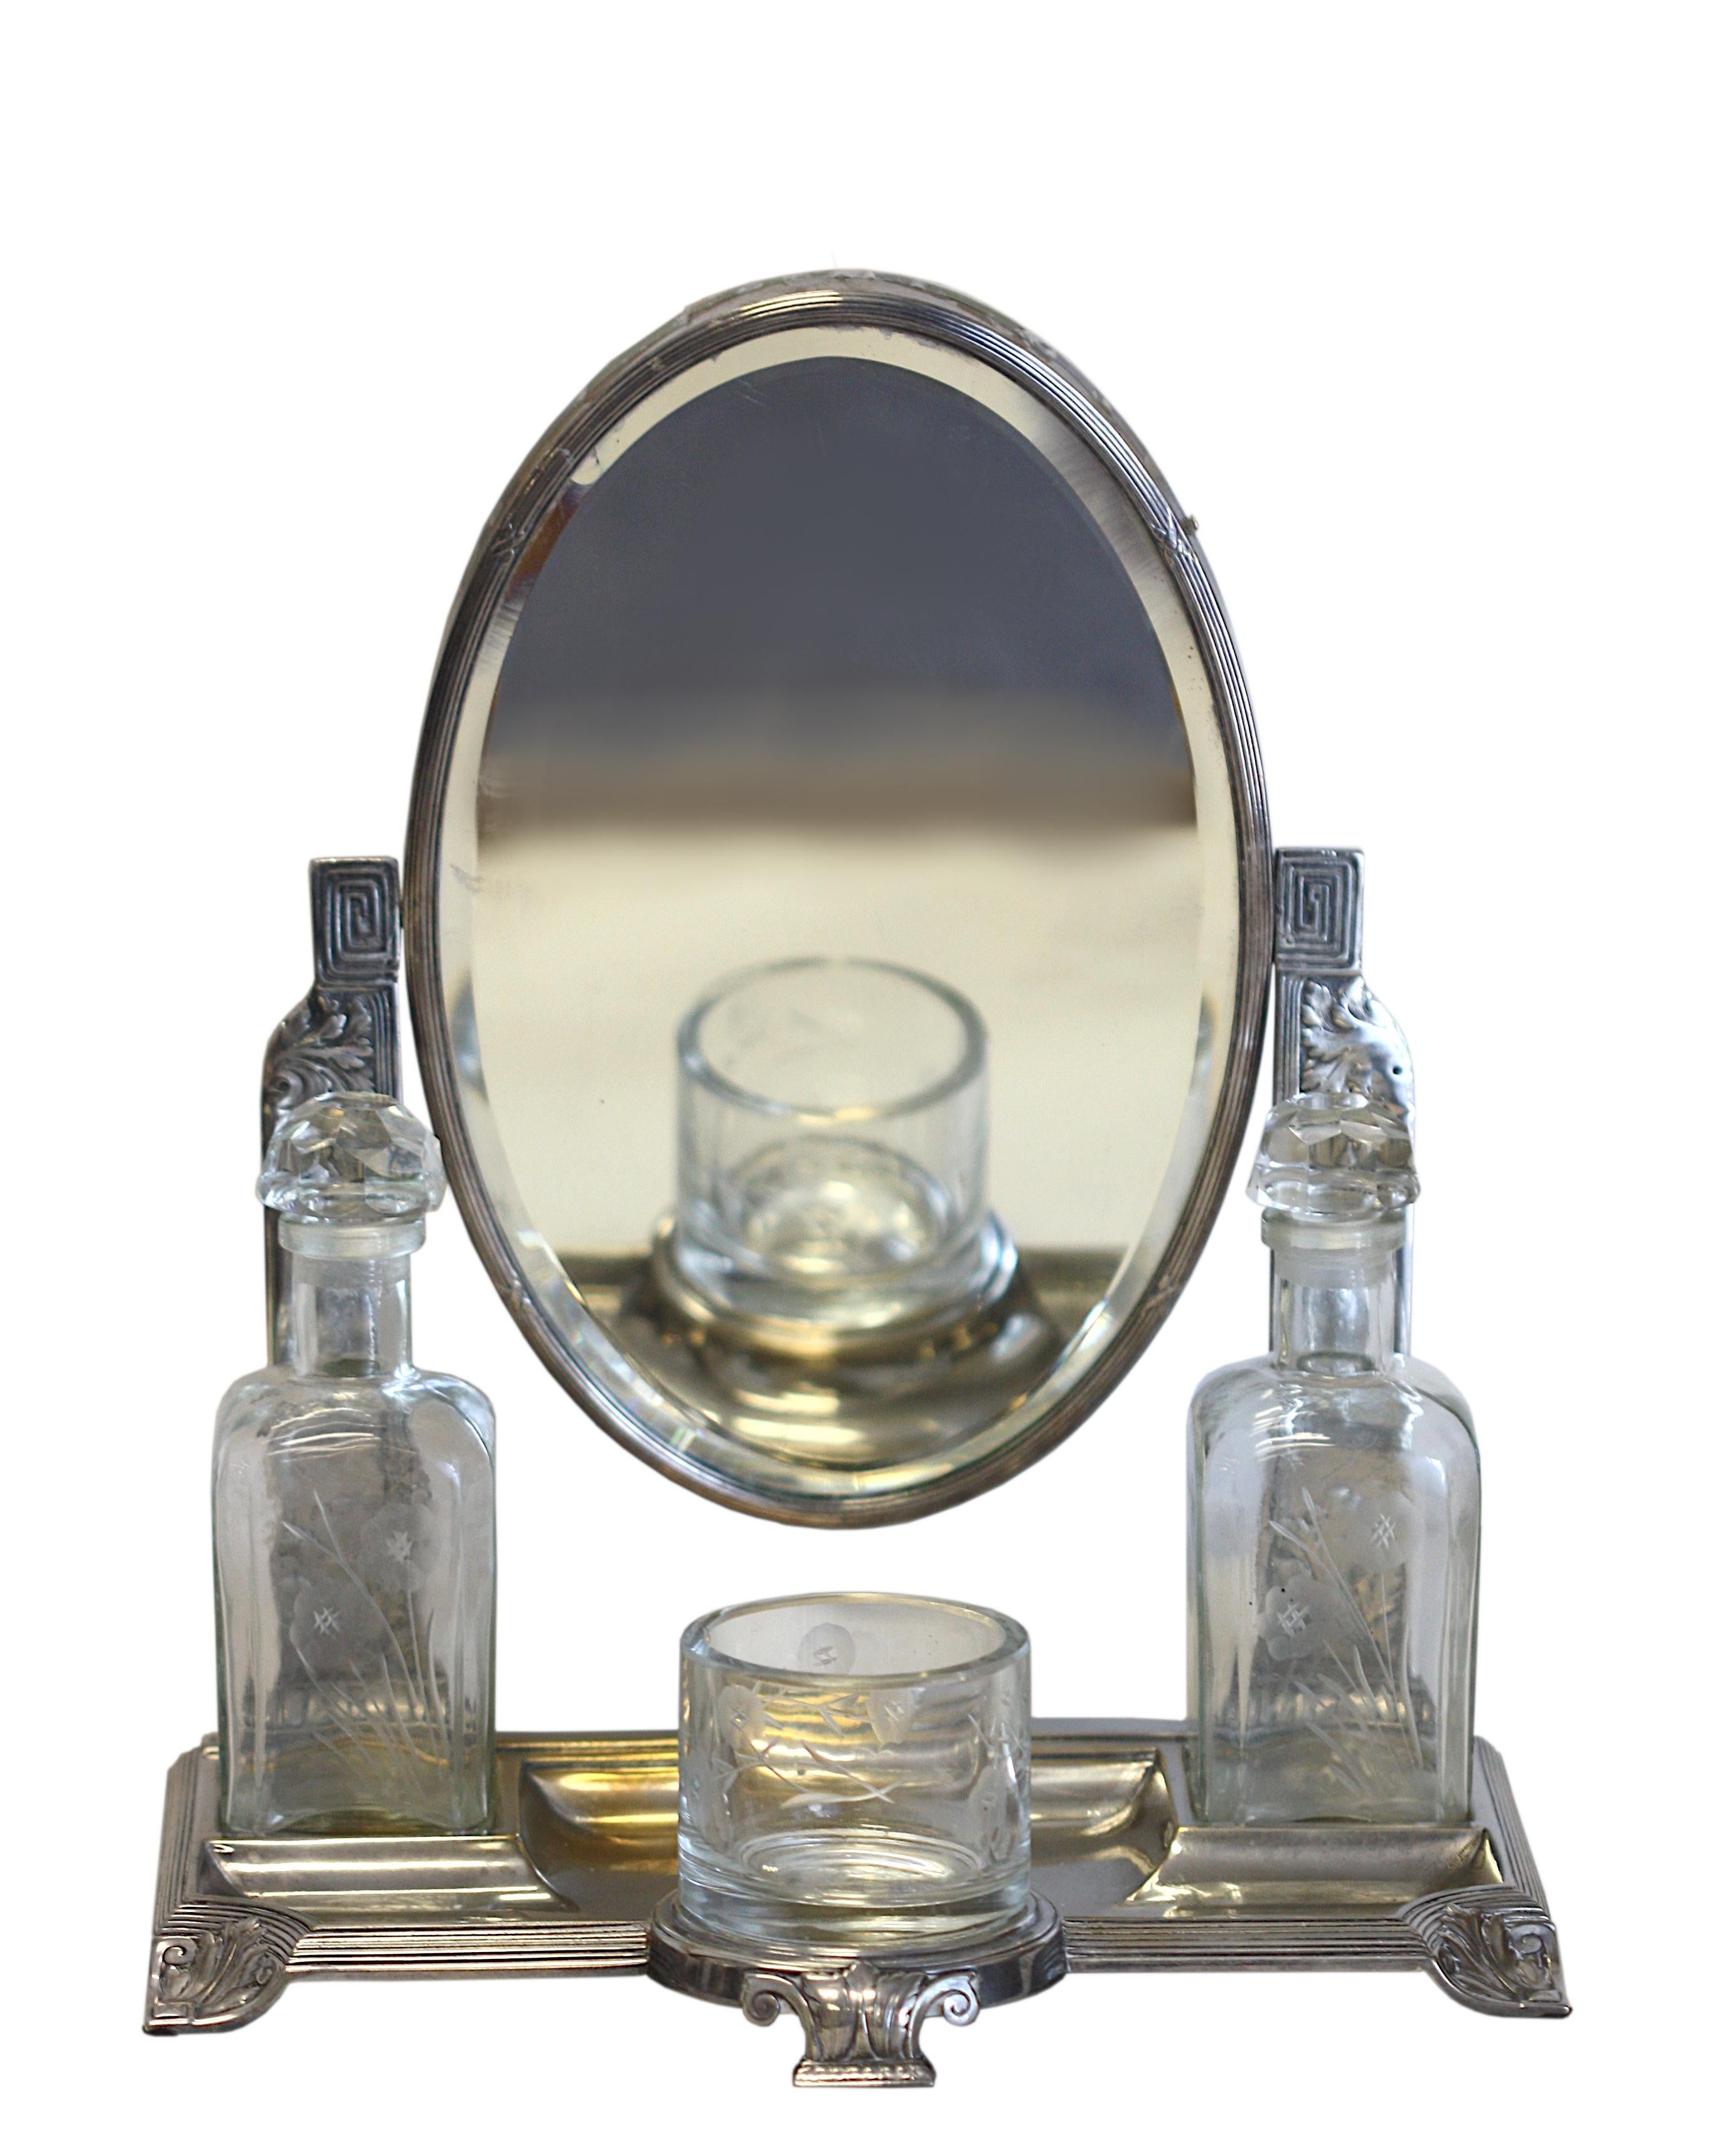 
Art Nouveau Silver Plate & Cut Glass Mirror Dressing Set
1900-1920. The oval mirror pivoted on two foliate and scroll chased supports, the base fitted with two stoppered bottles and a glass. 
Height 14 in. (35.56 cm.), Width 12 in. (30.48 cm.),